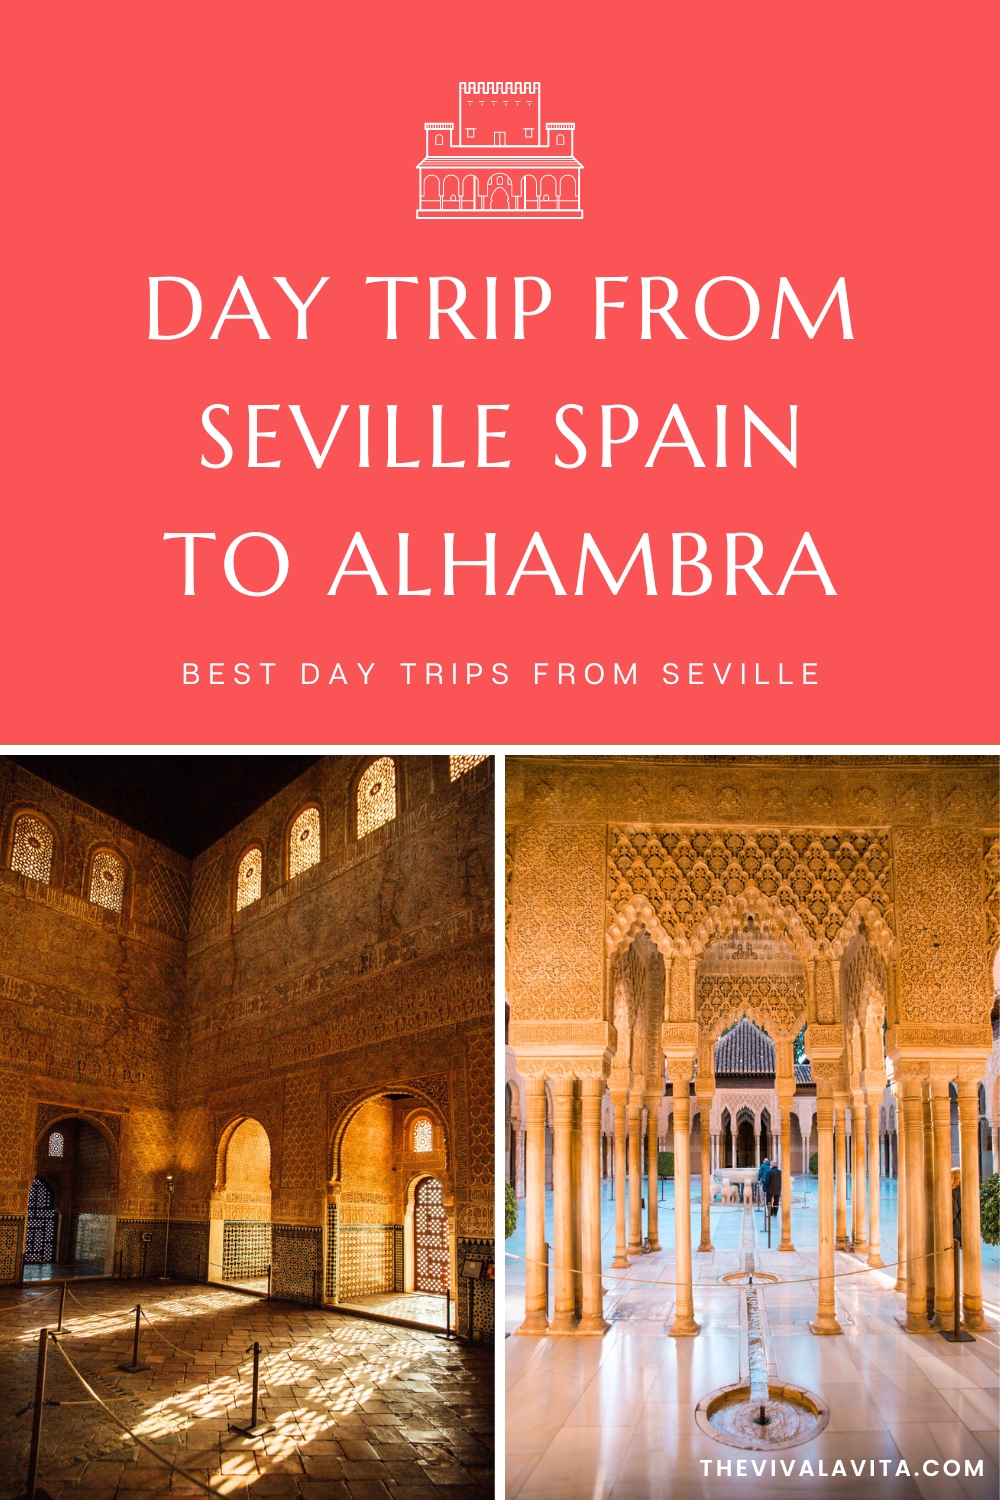 pinterest image showing the interiors of Alhambra and courtyard of the lions, with a headline: day trip from seville spain to Alhambra, best day trips from Seville